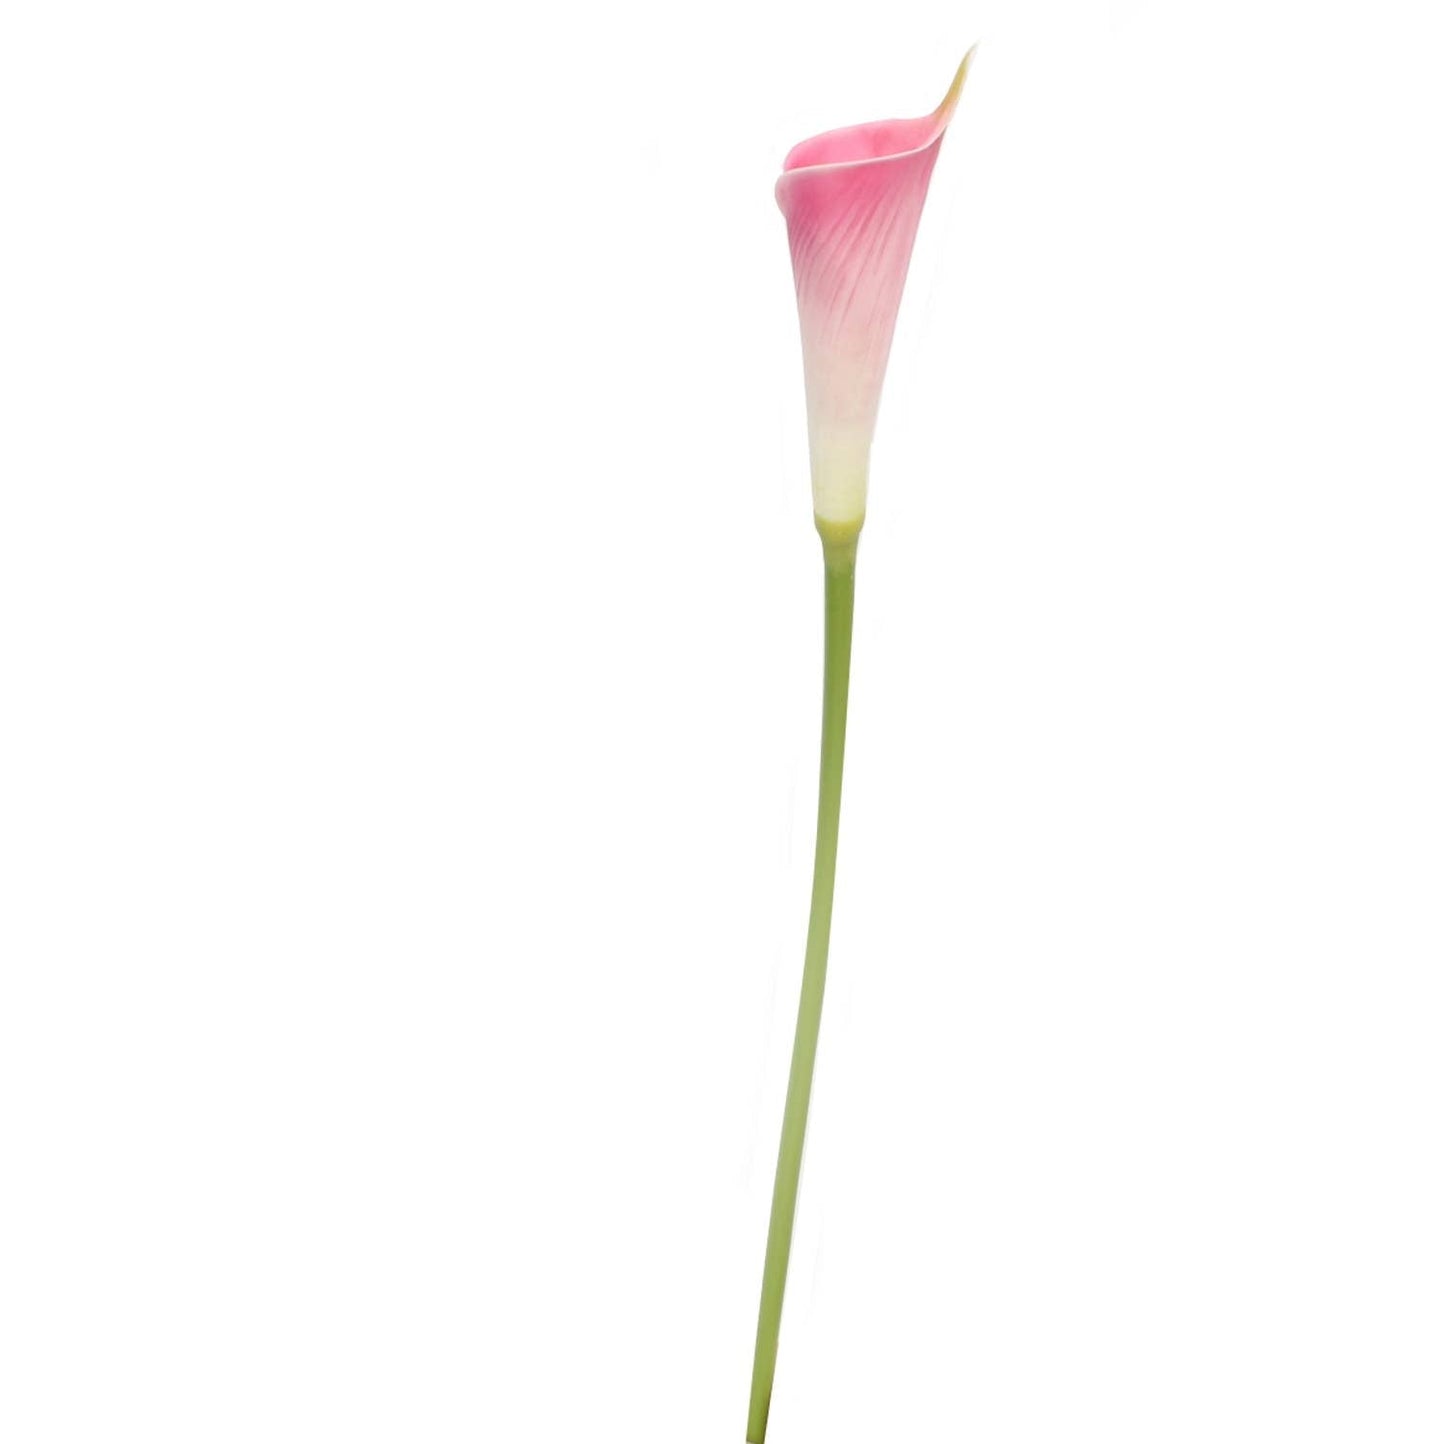 24" Long Premium Lifelike Real Touch Artificial Calla lily